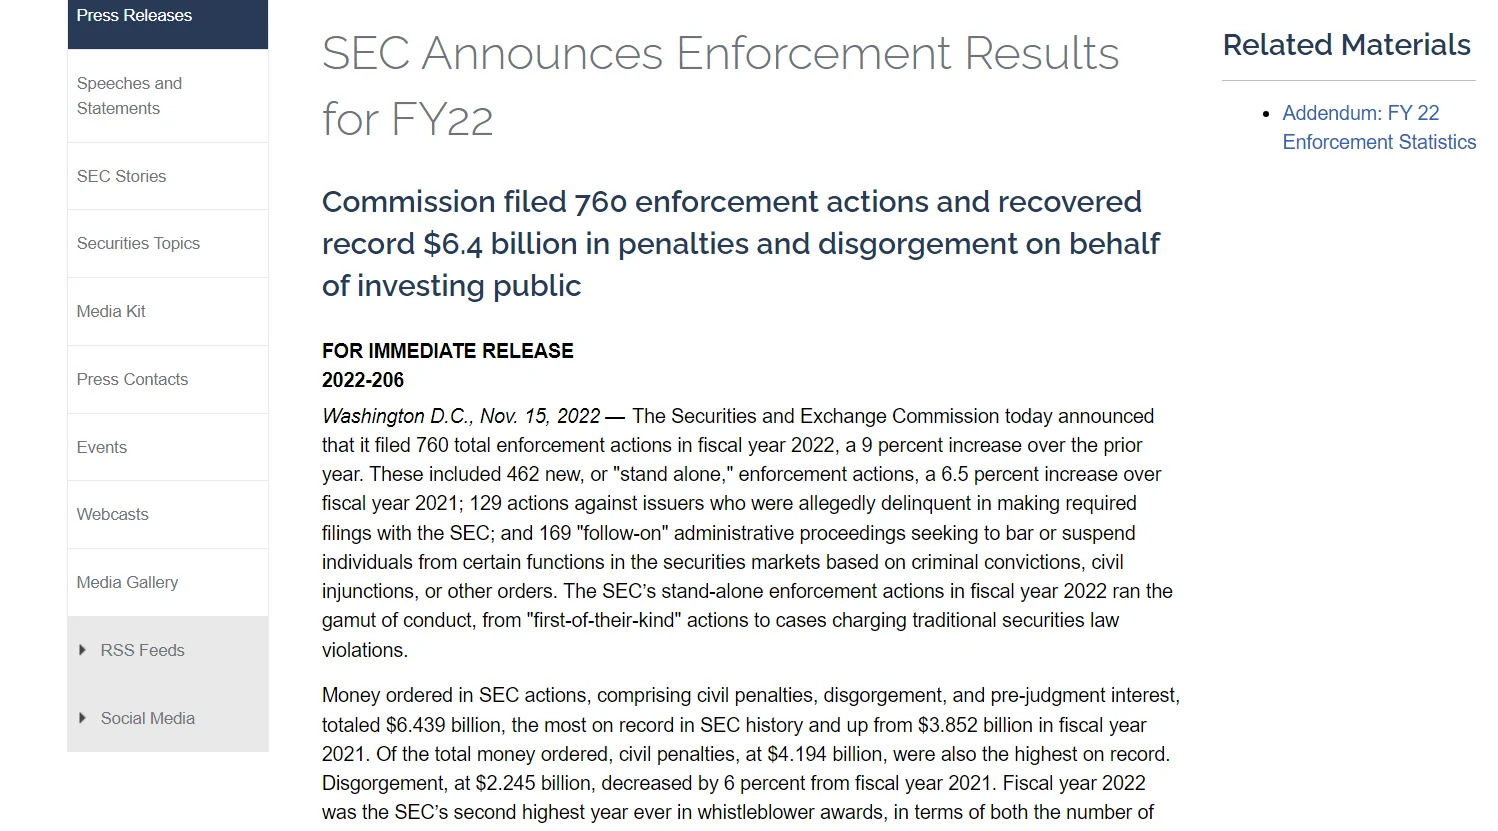 SEC’s bulletin announcing the enforcement results for FY22 with 760 enforcement actions and $6.4 billion recovered